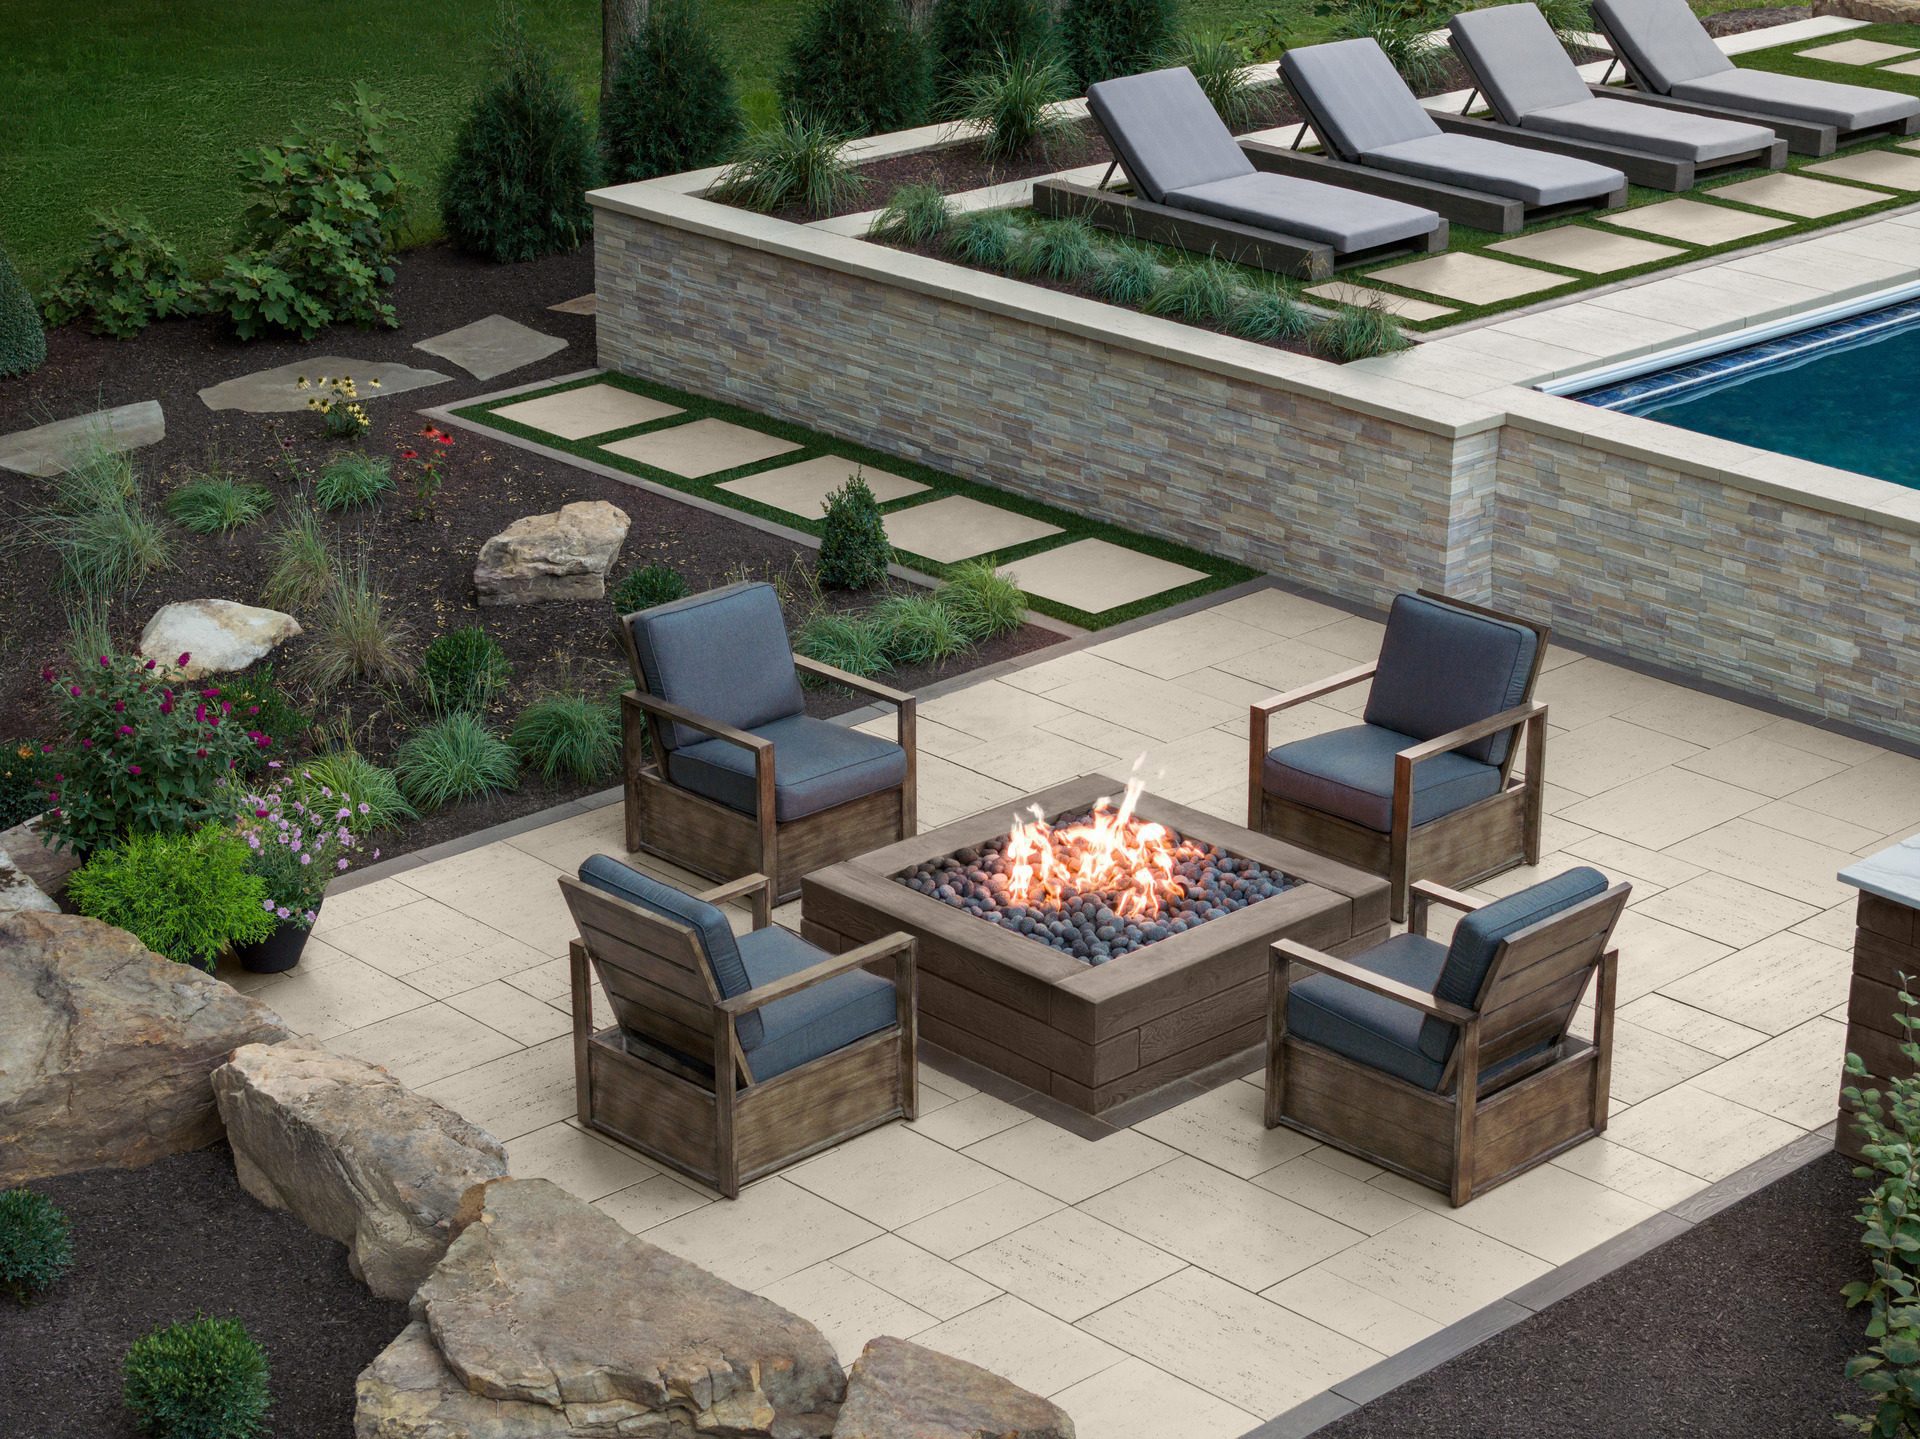 Seating area around a firepit beside garden beds and a pool in a residential backyard. 